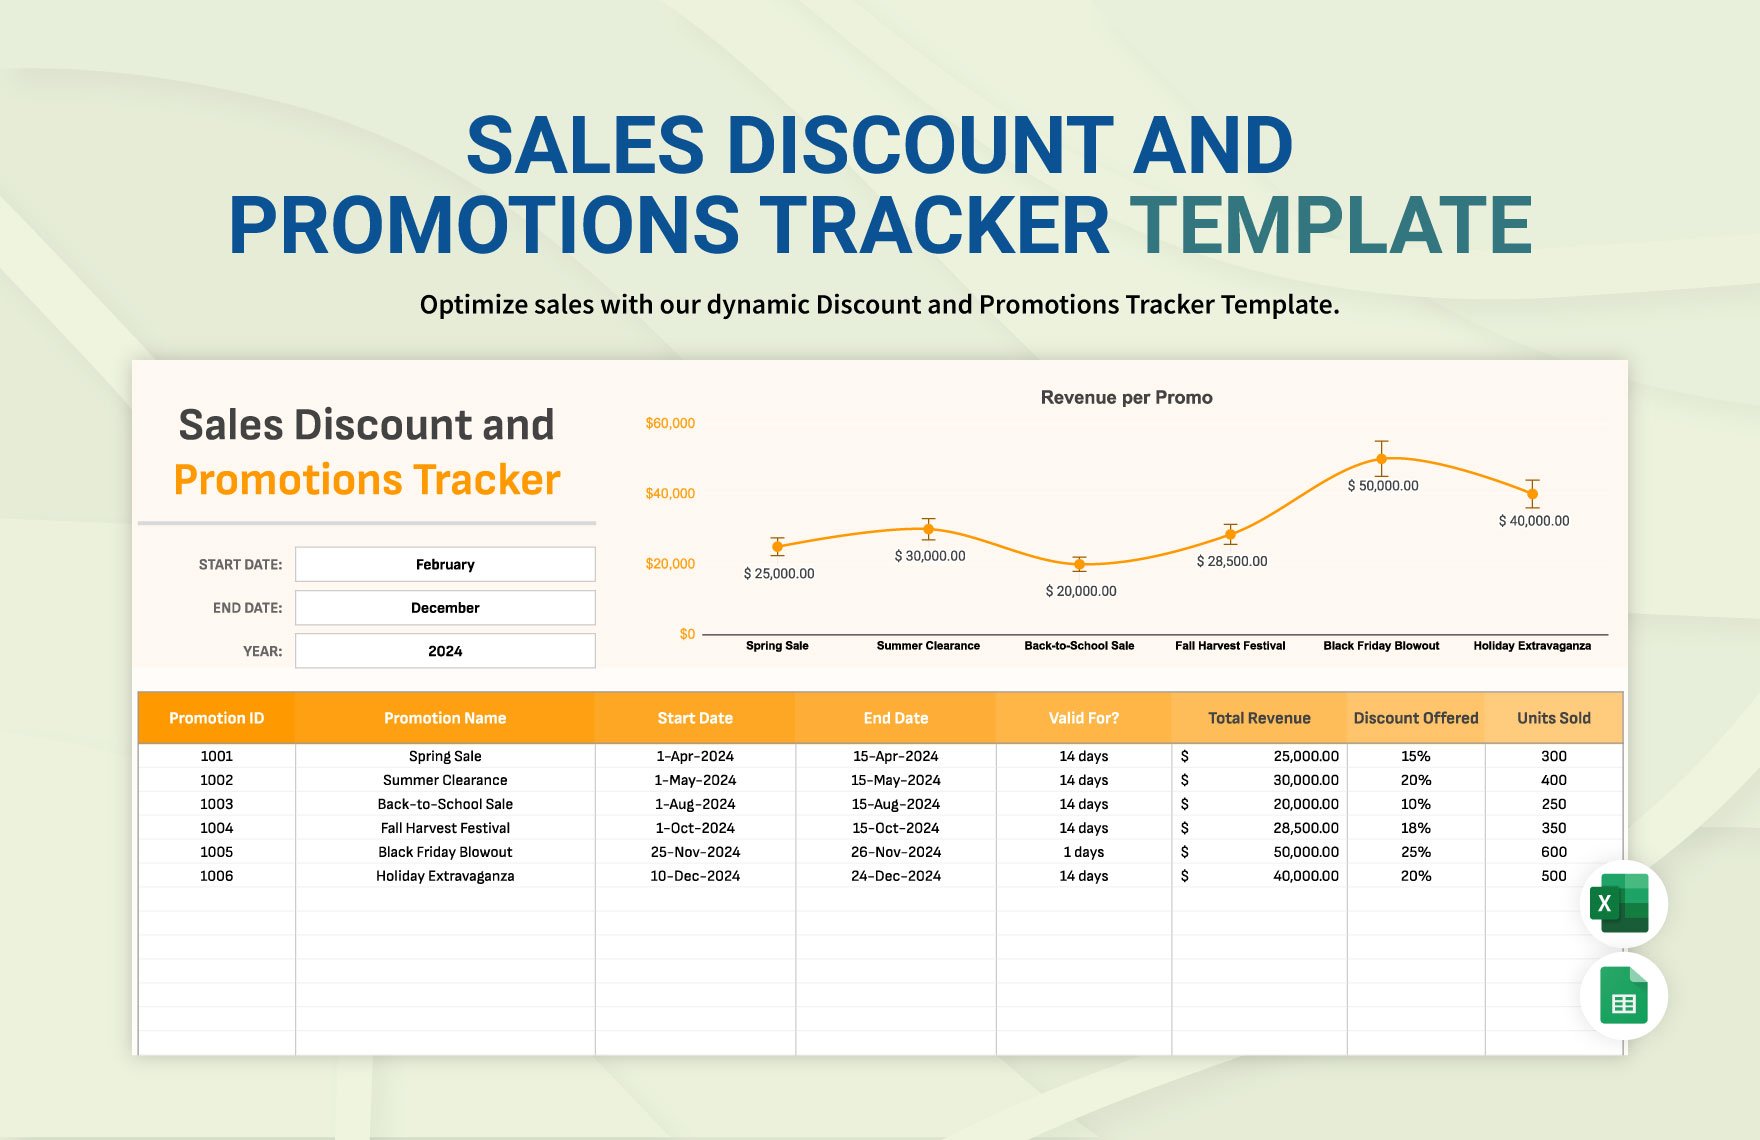 Sales Discount and Promotions Tracker Template